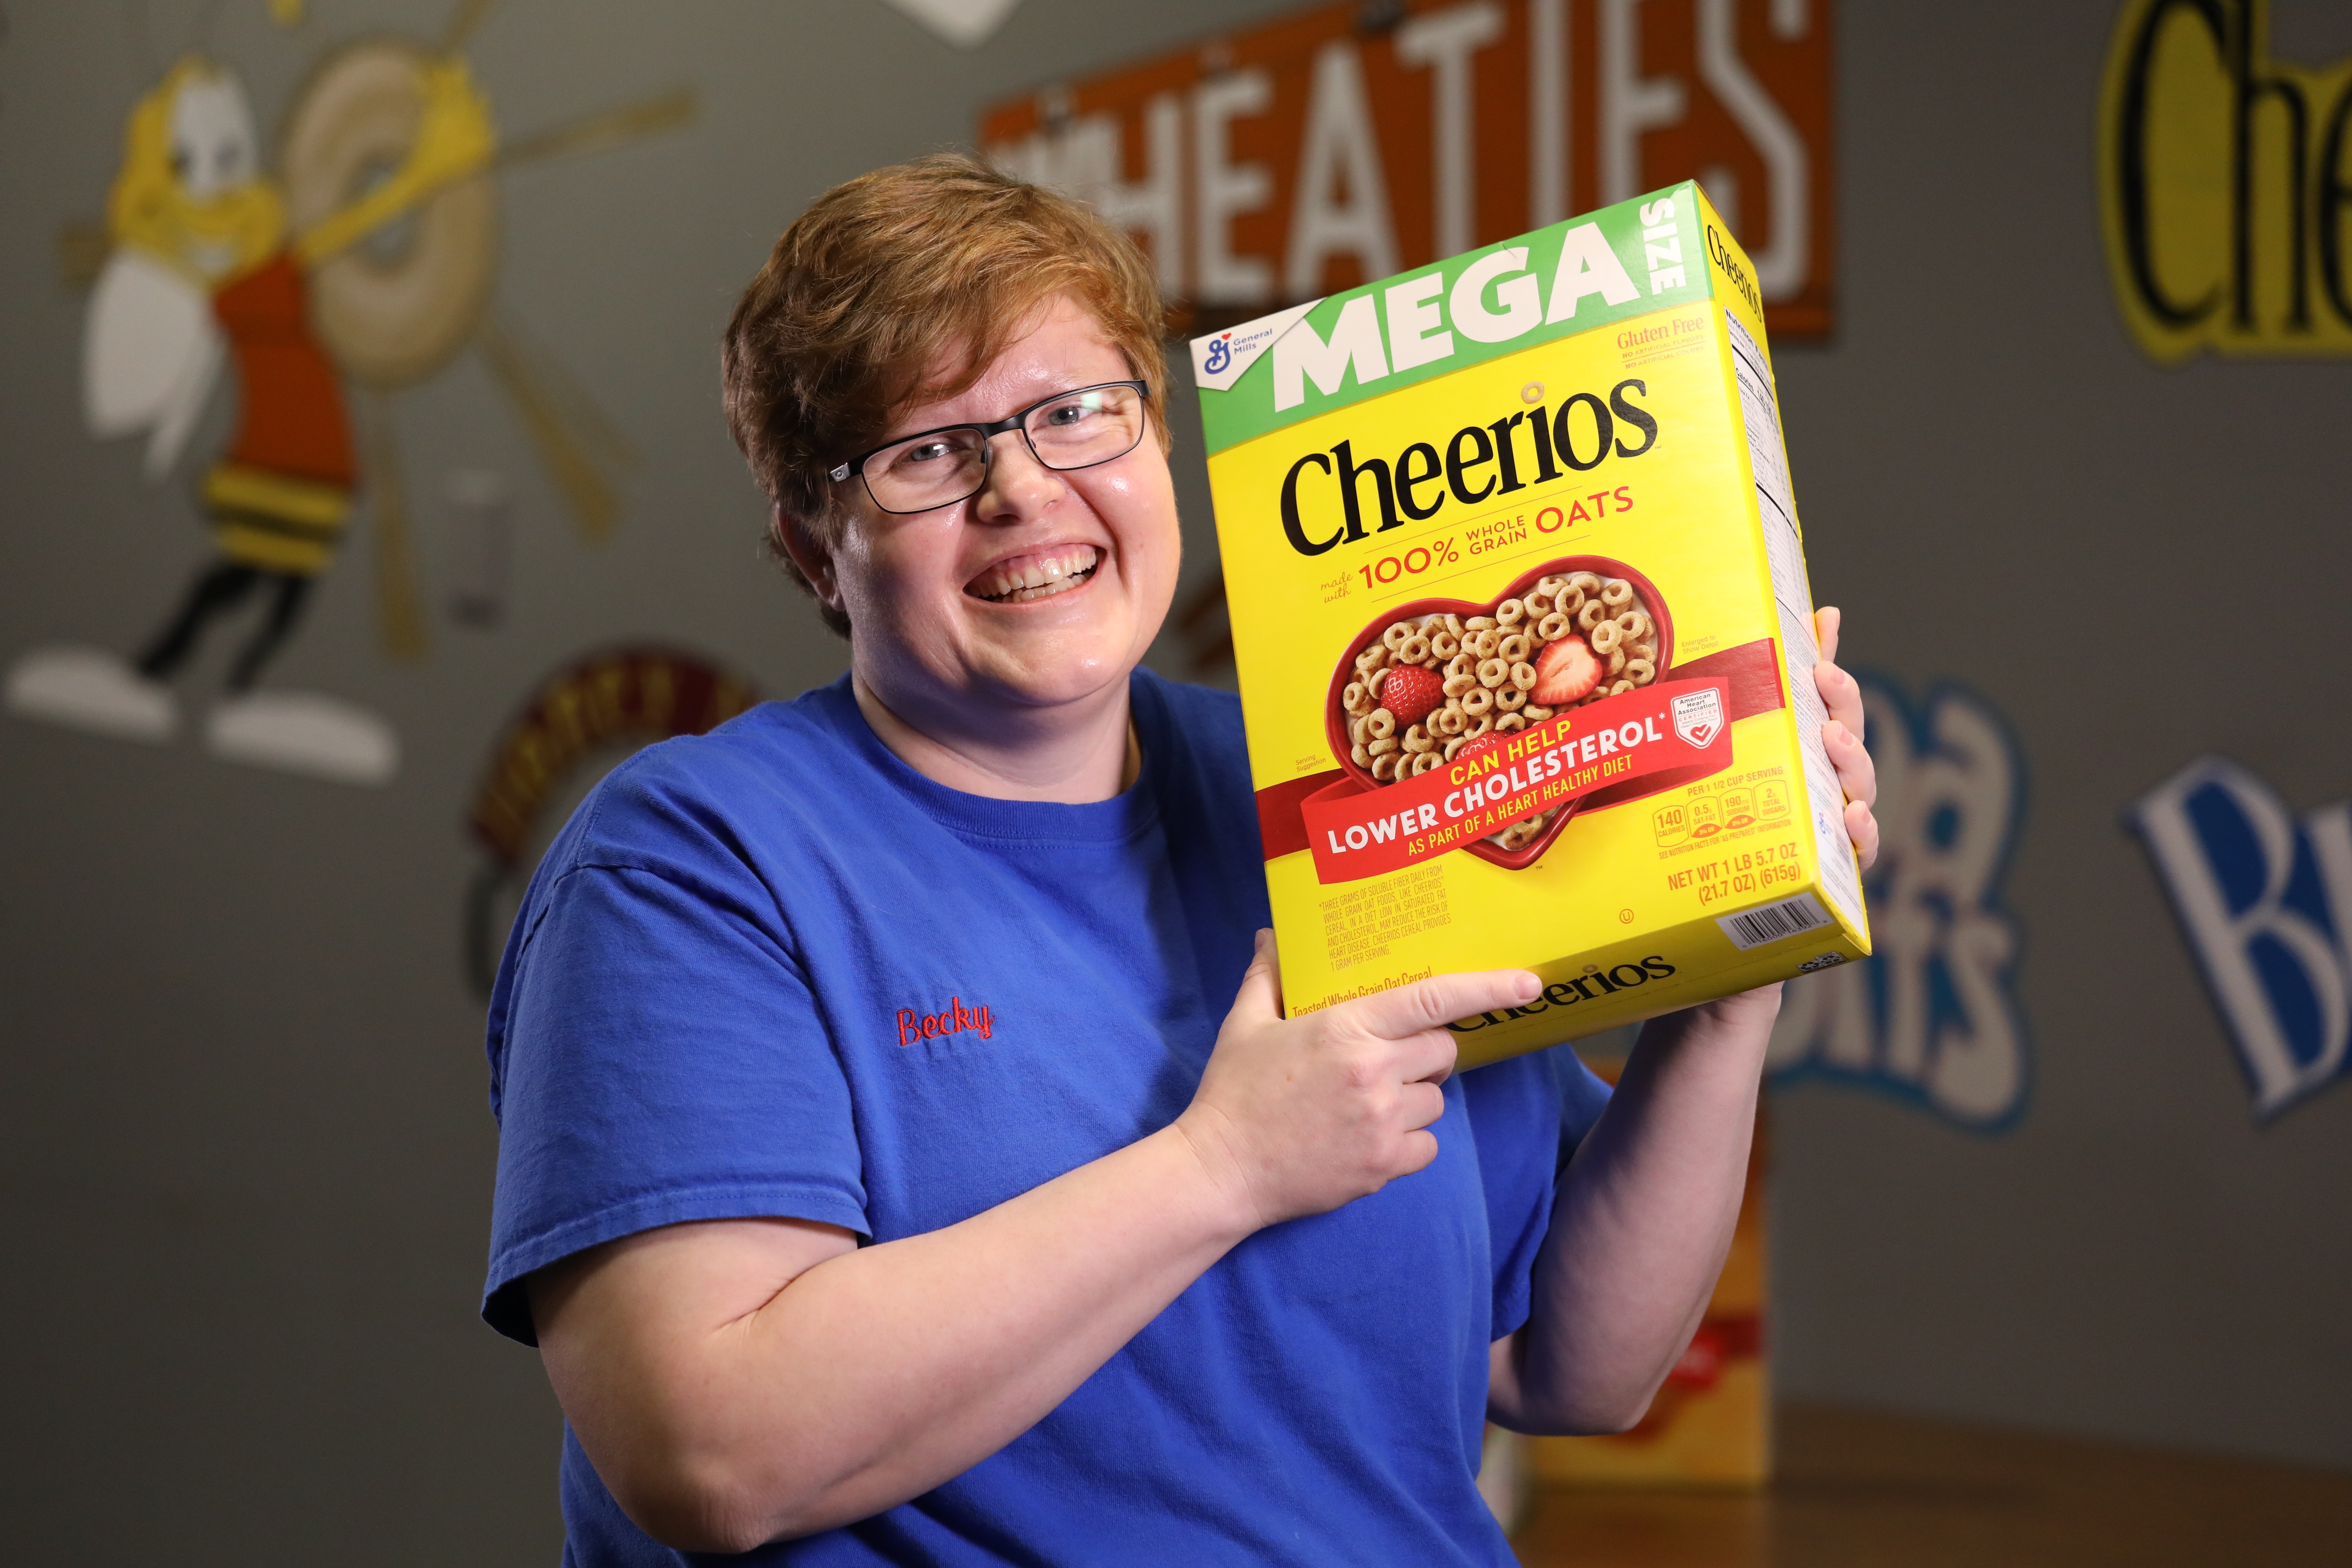 plant employee holding a box of Cheerios